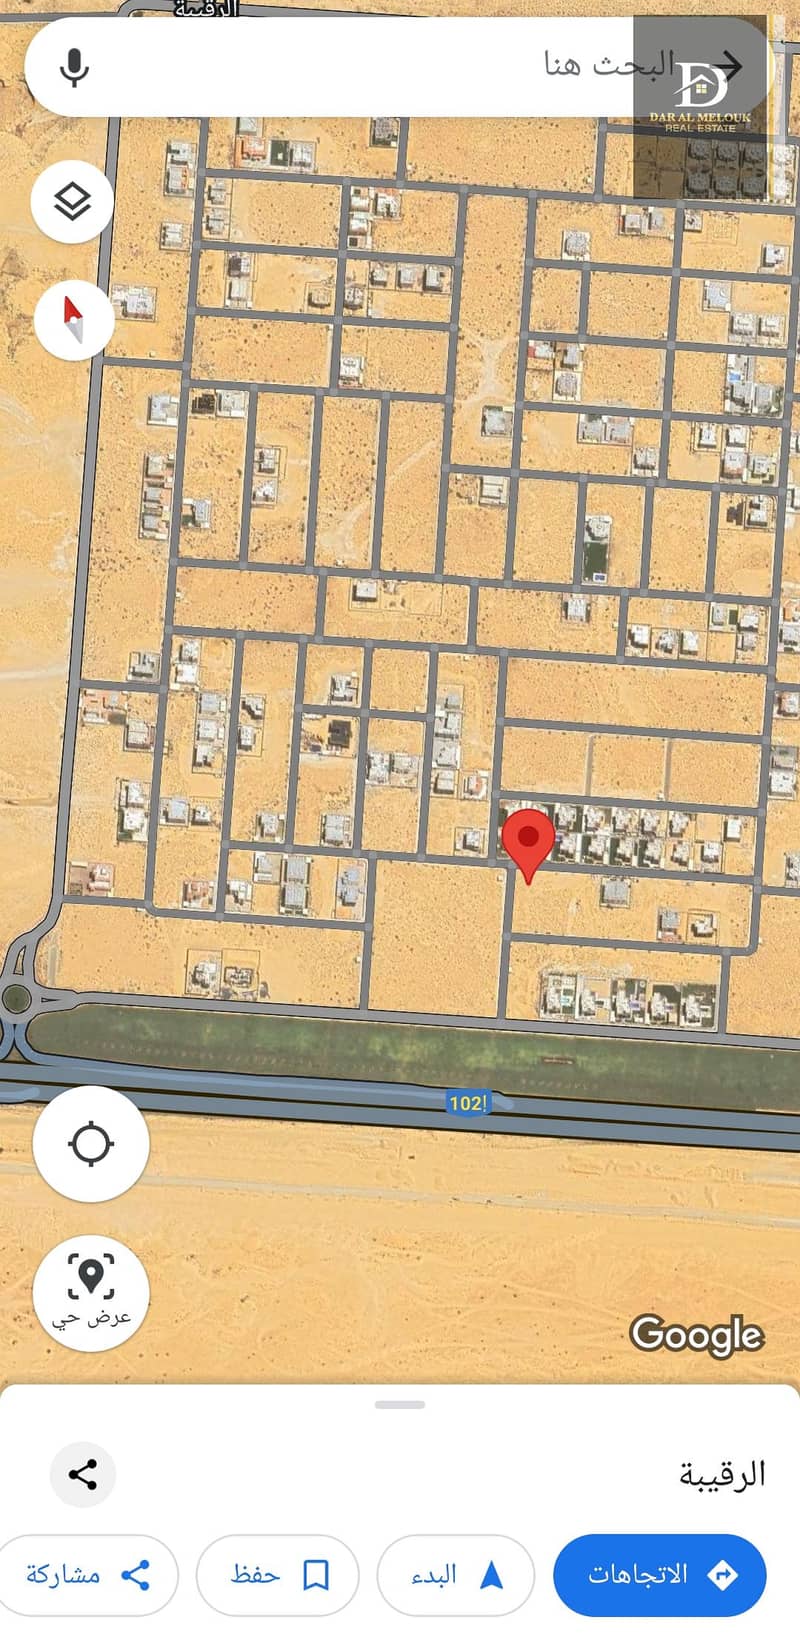 For sale in Sharjah, Al-Raqiba area, Al-Siuh suburb, residential investment land, area of ​​11,600 feet, permit for a residential investment villa, permitting two attached villas, excellent location, corner on two streets, directly in front of the garden,